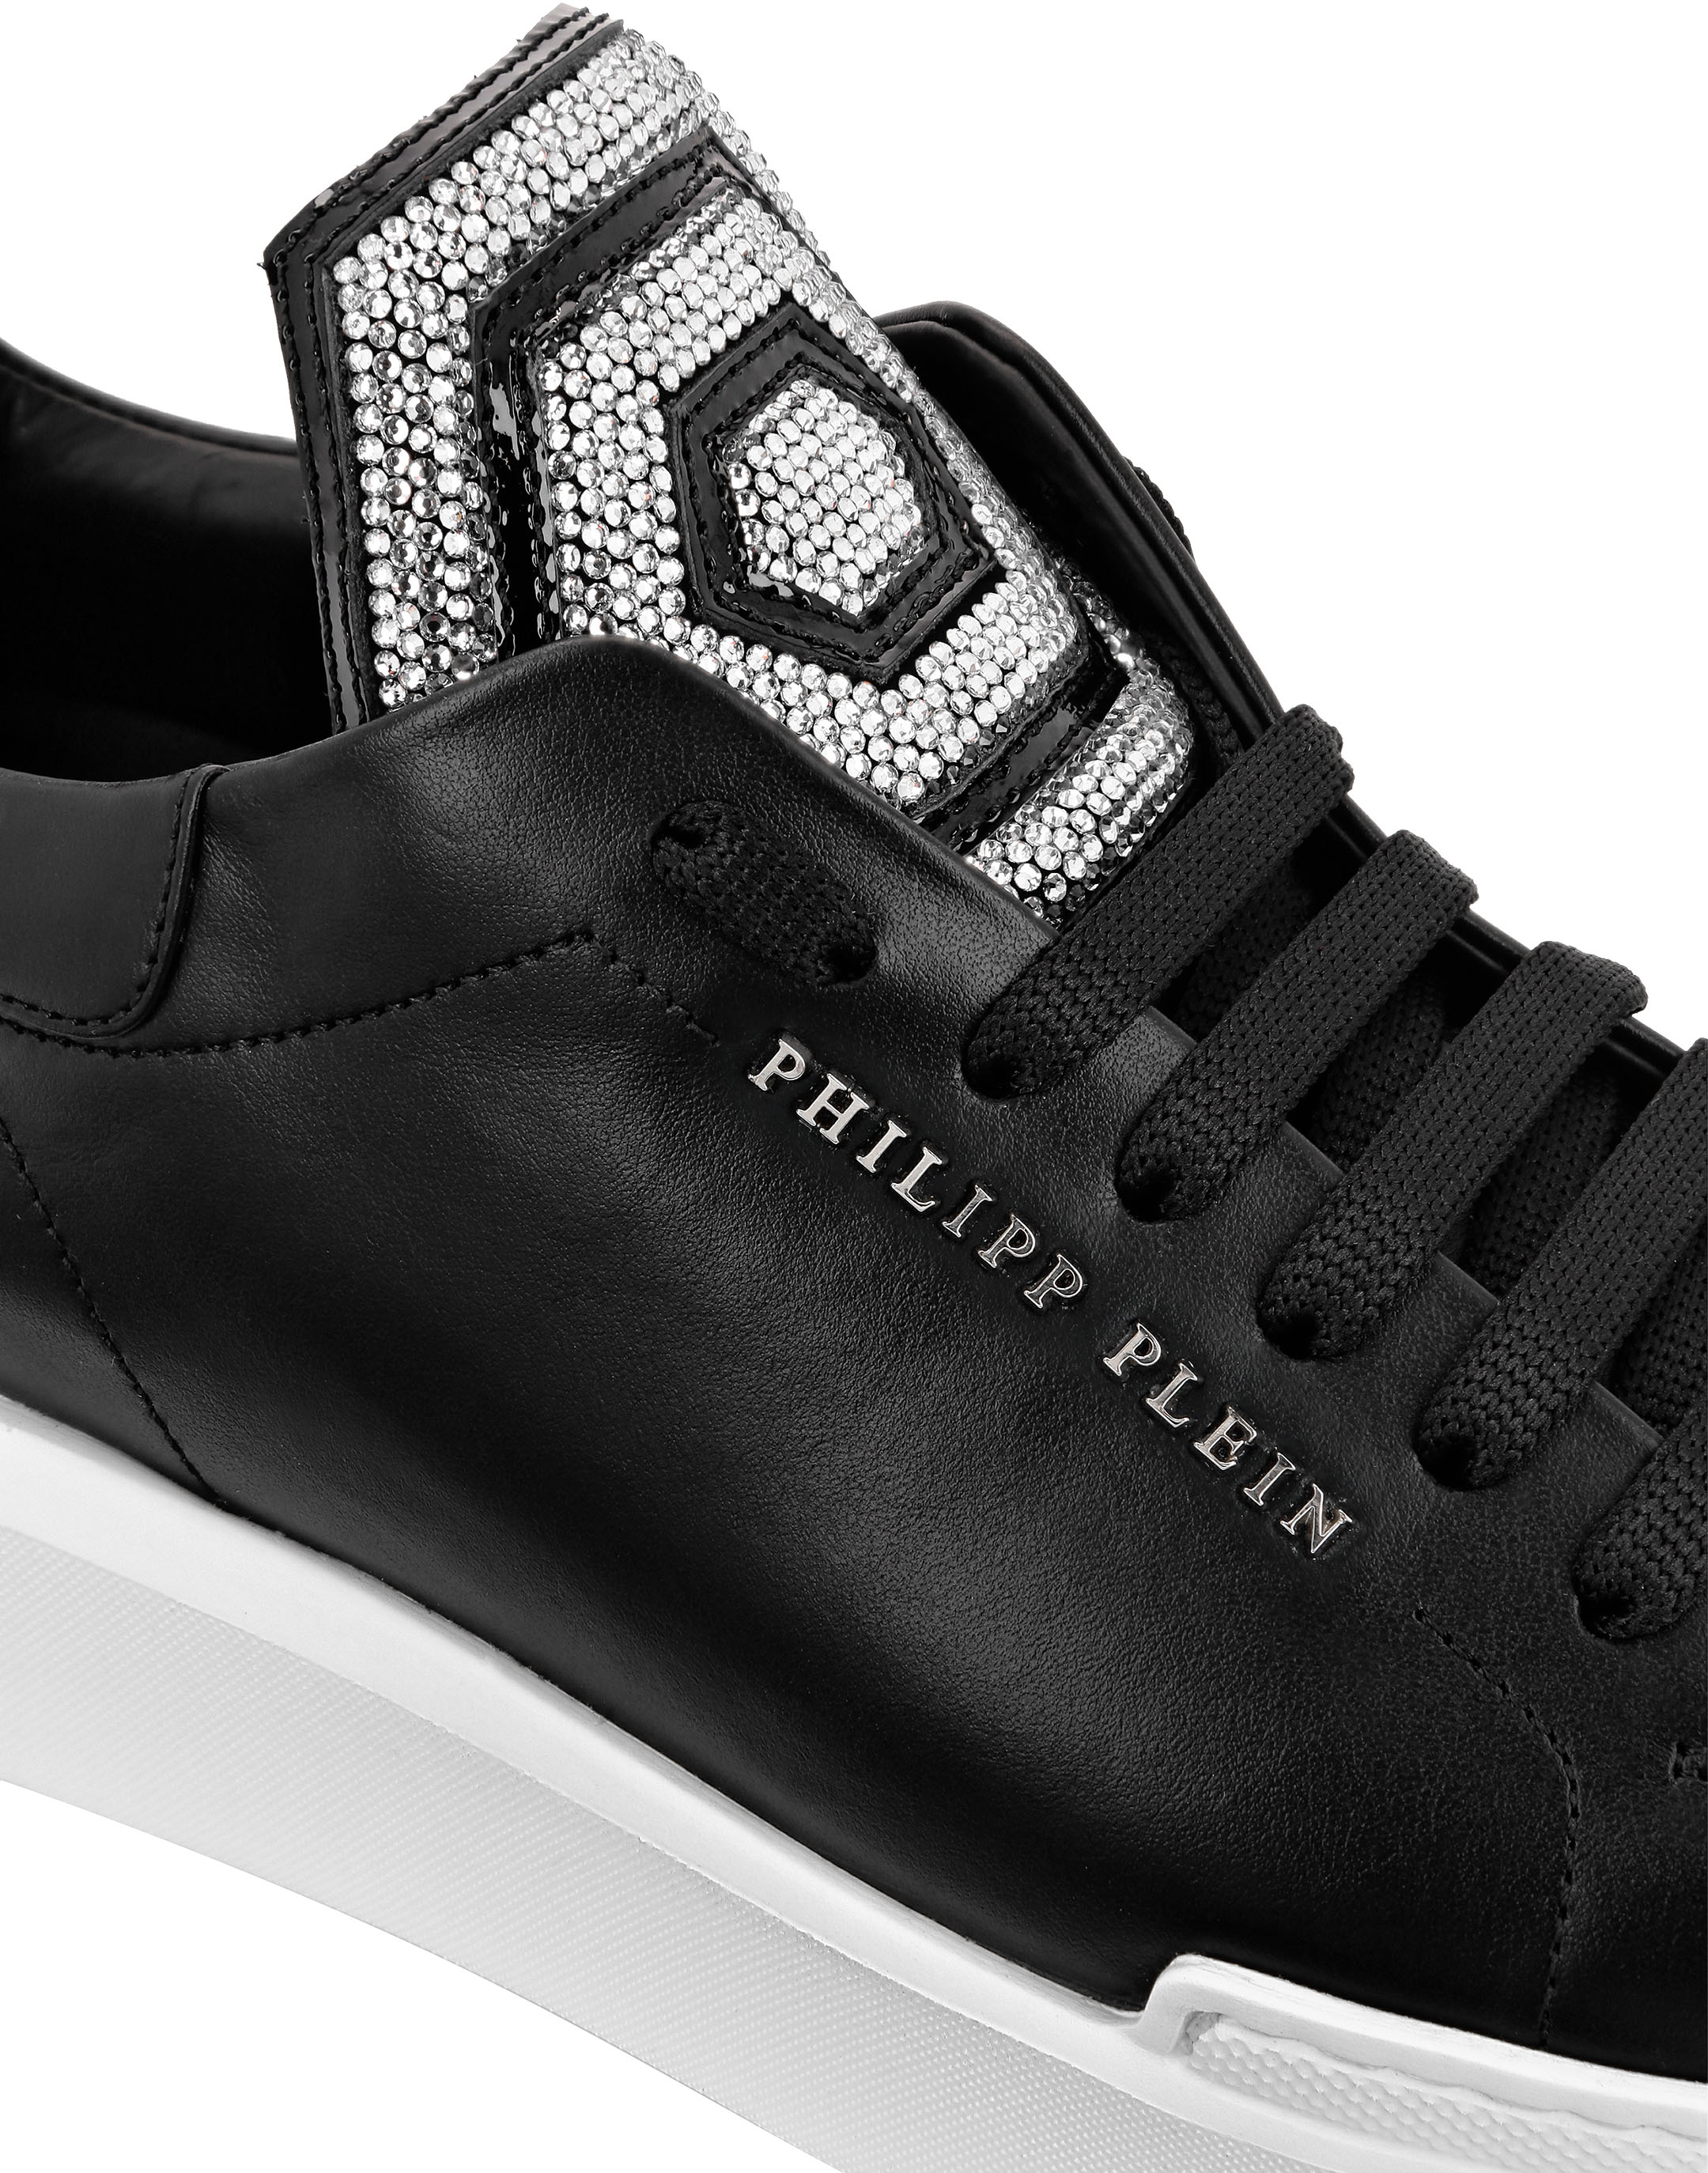 Lo-Top Sneakers Statement | Philipp Plein Outlet